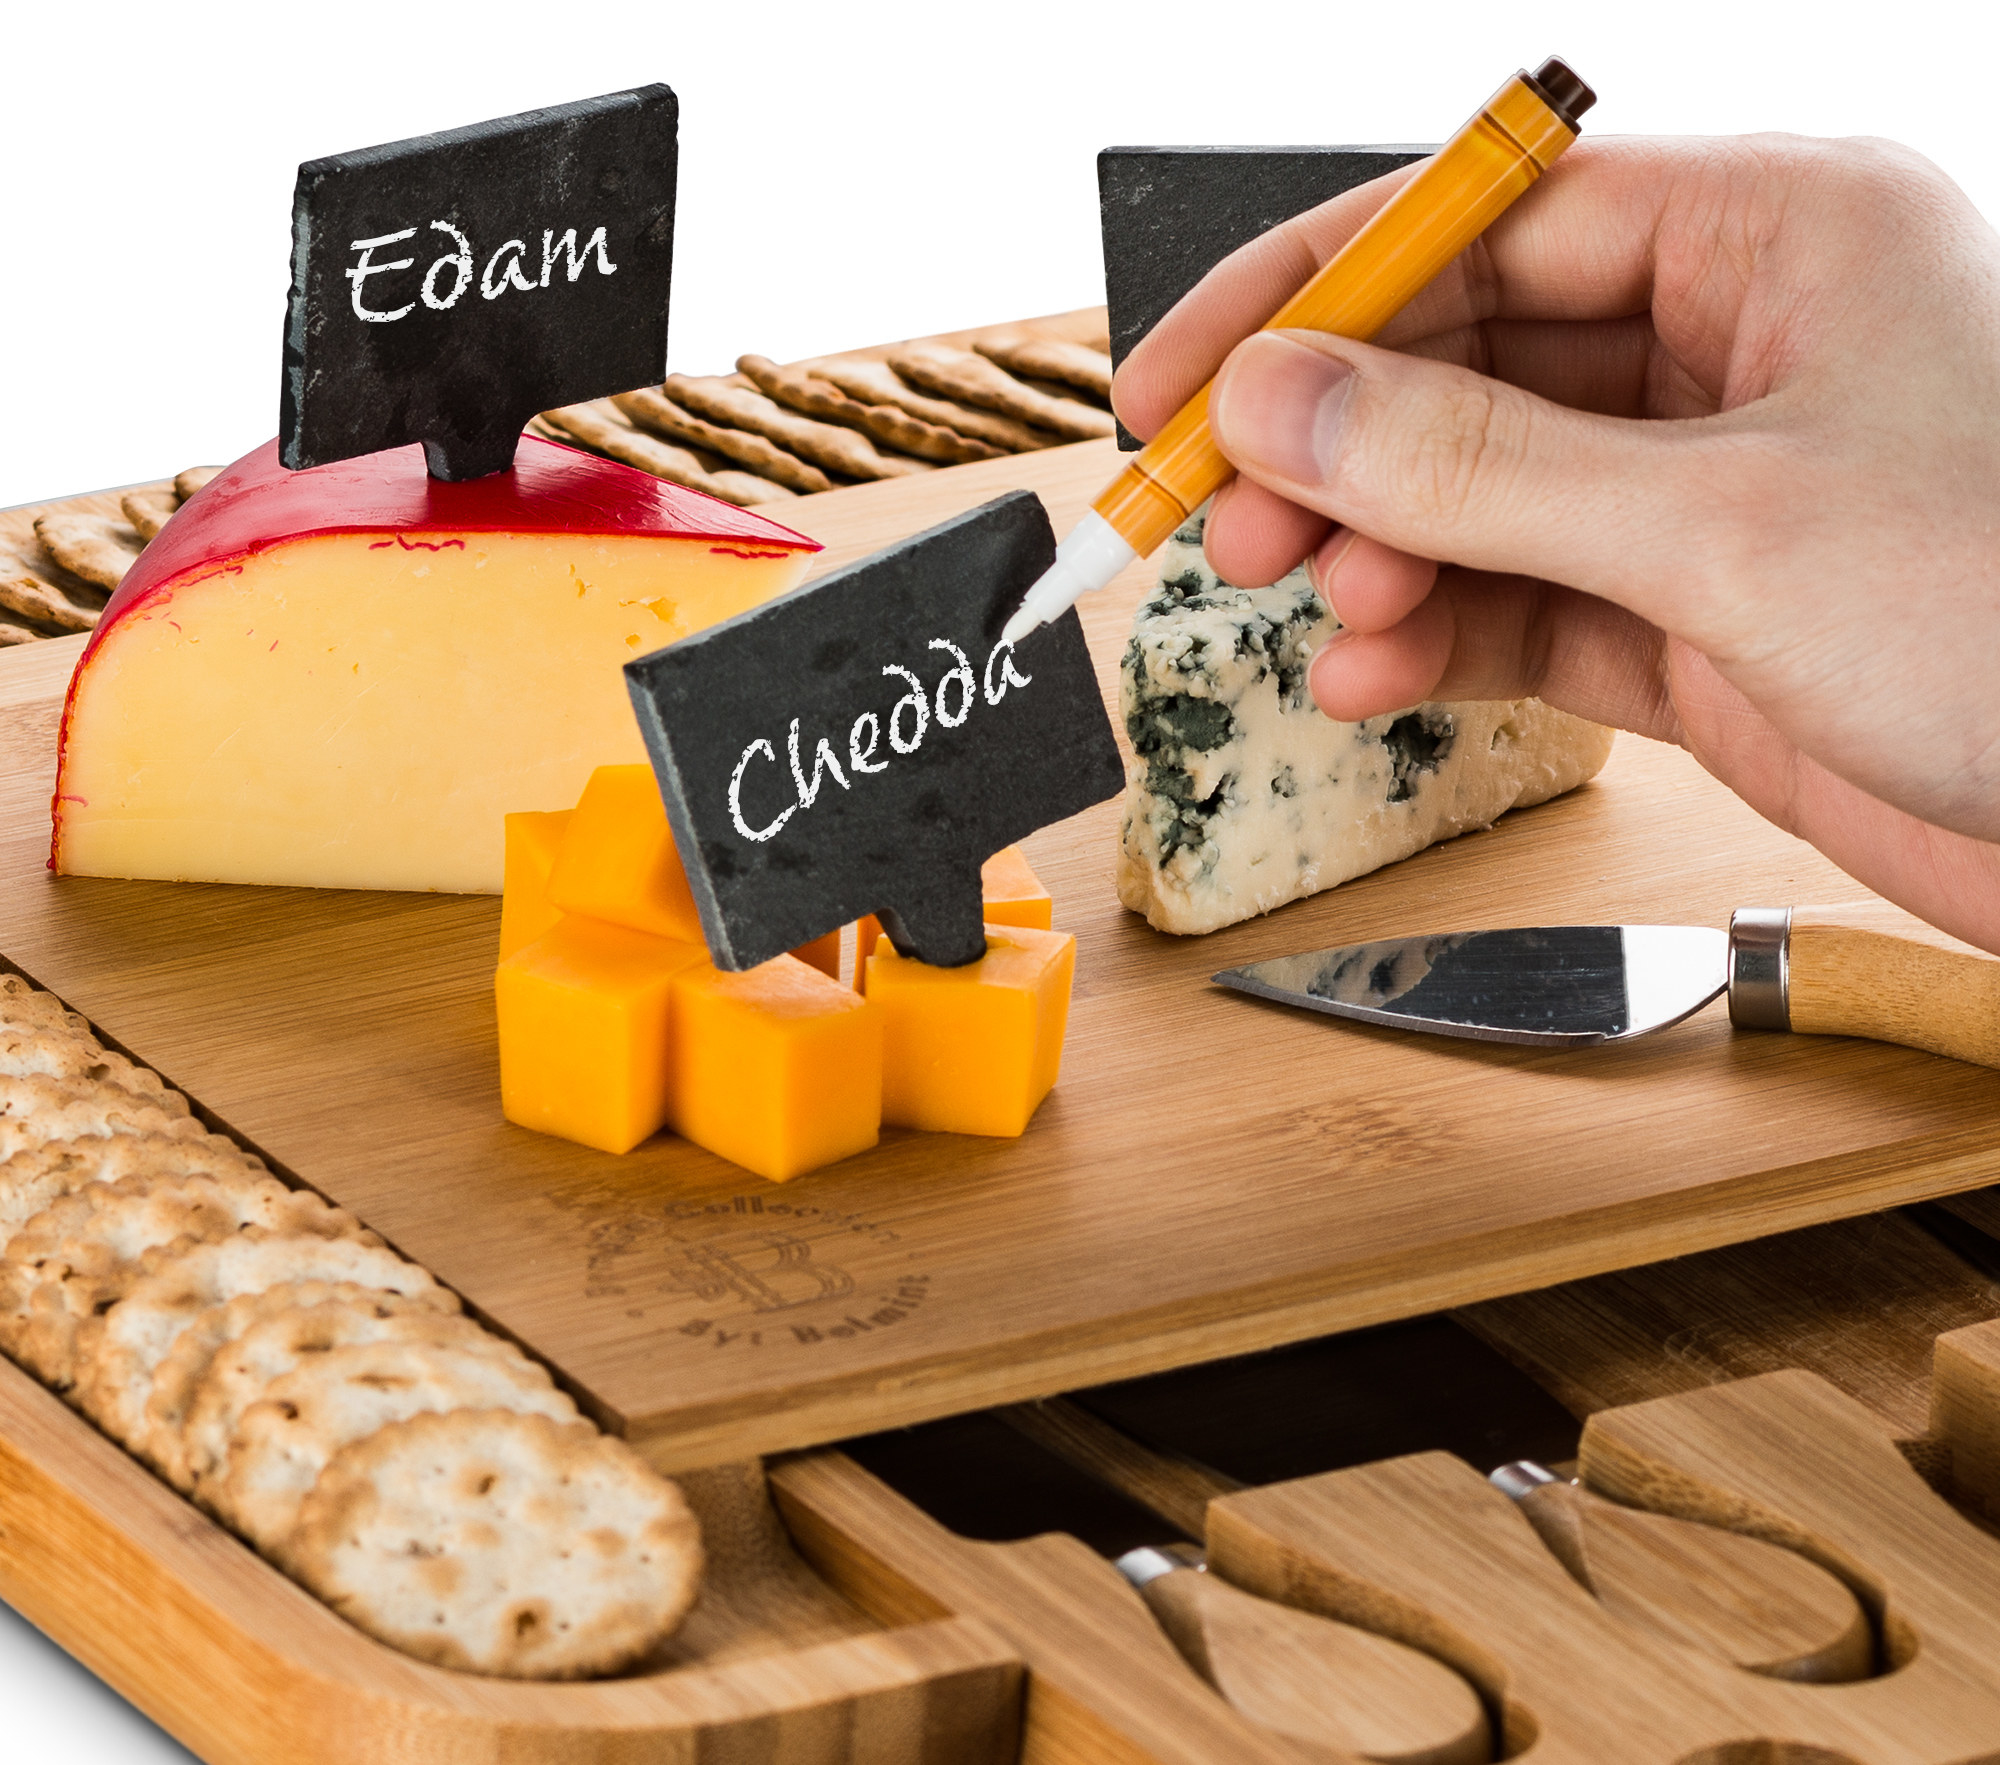 The cheese board and labels with someone writing on the labels